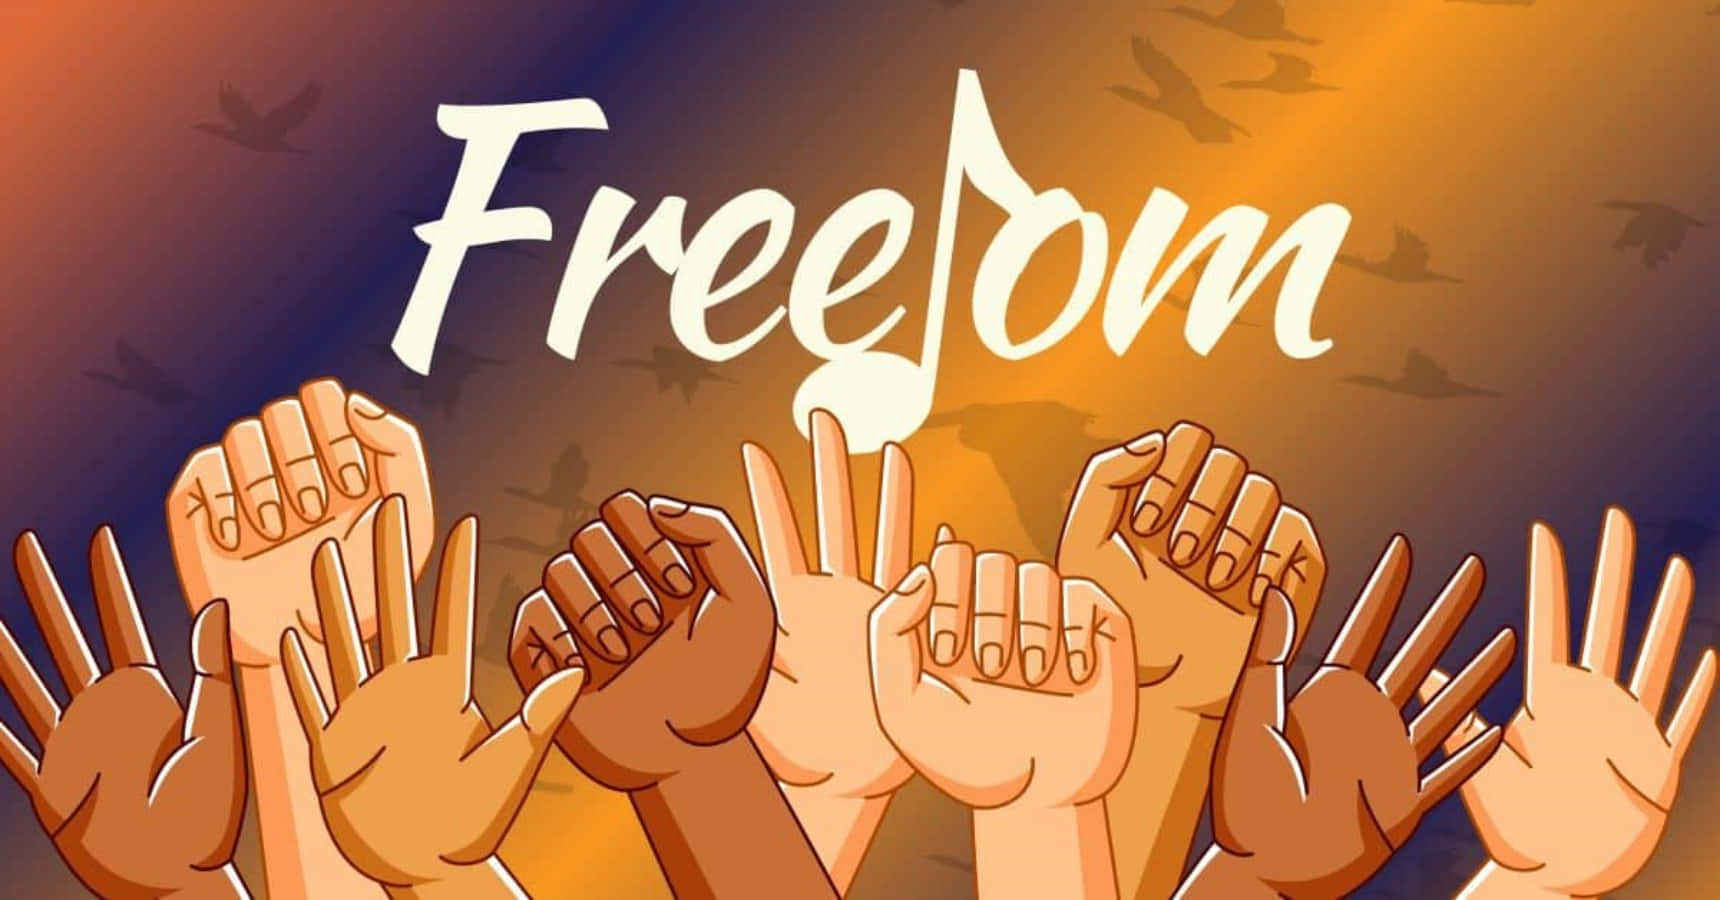 A Group Of Hands With The Word Freedom